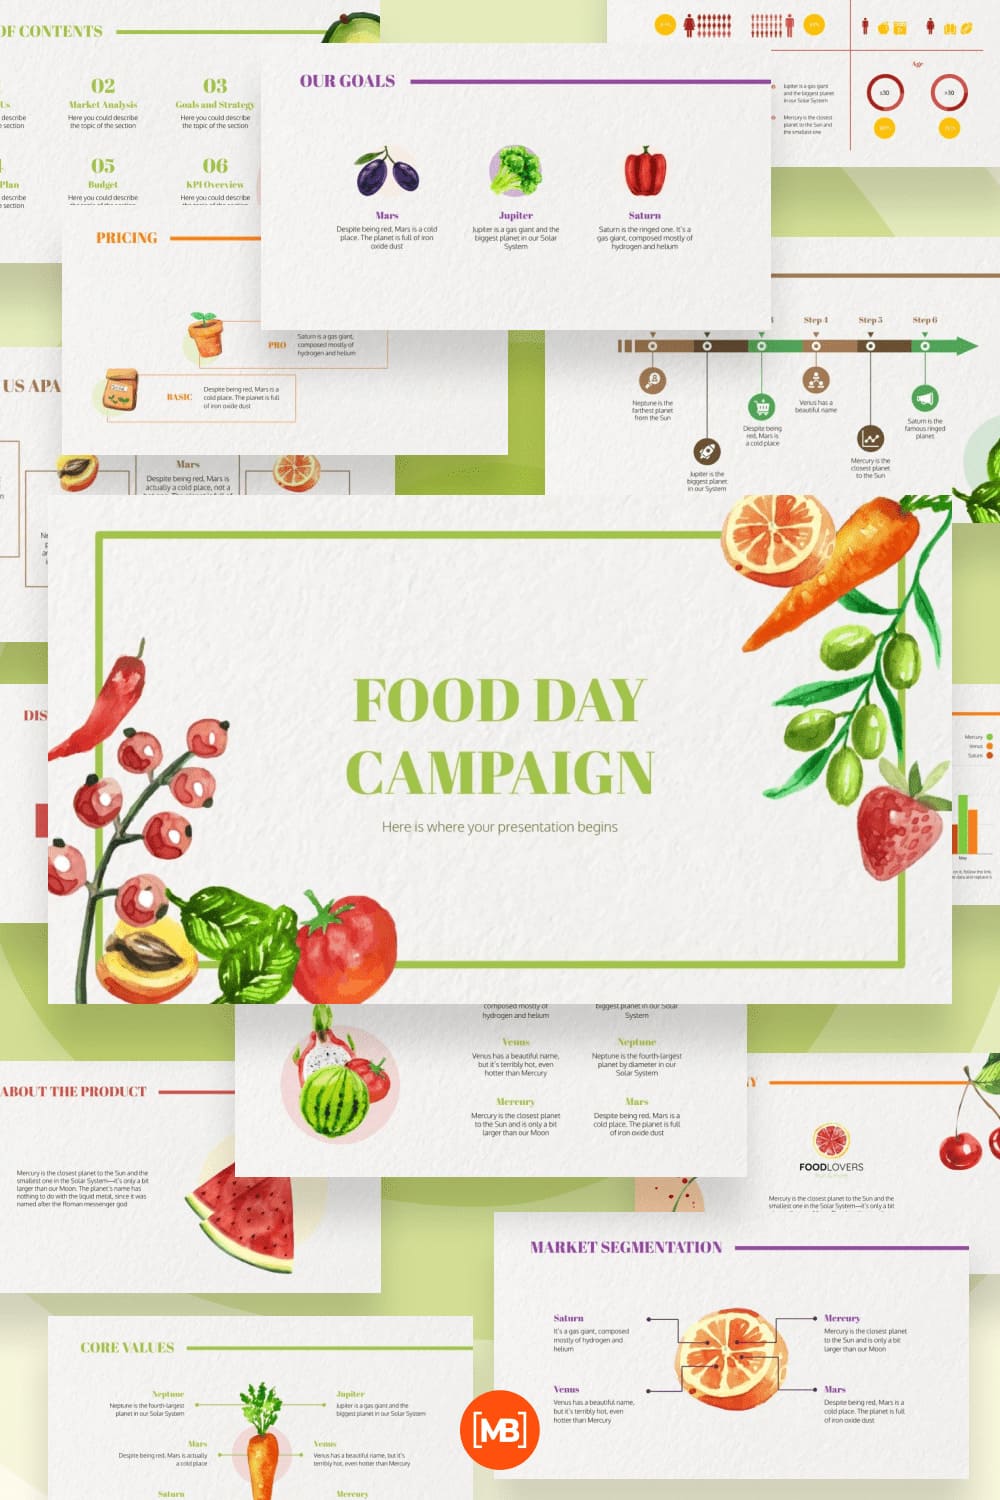 Food day campaign.